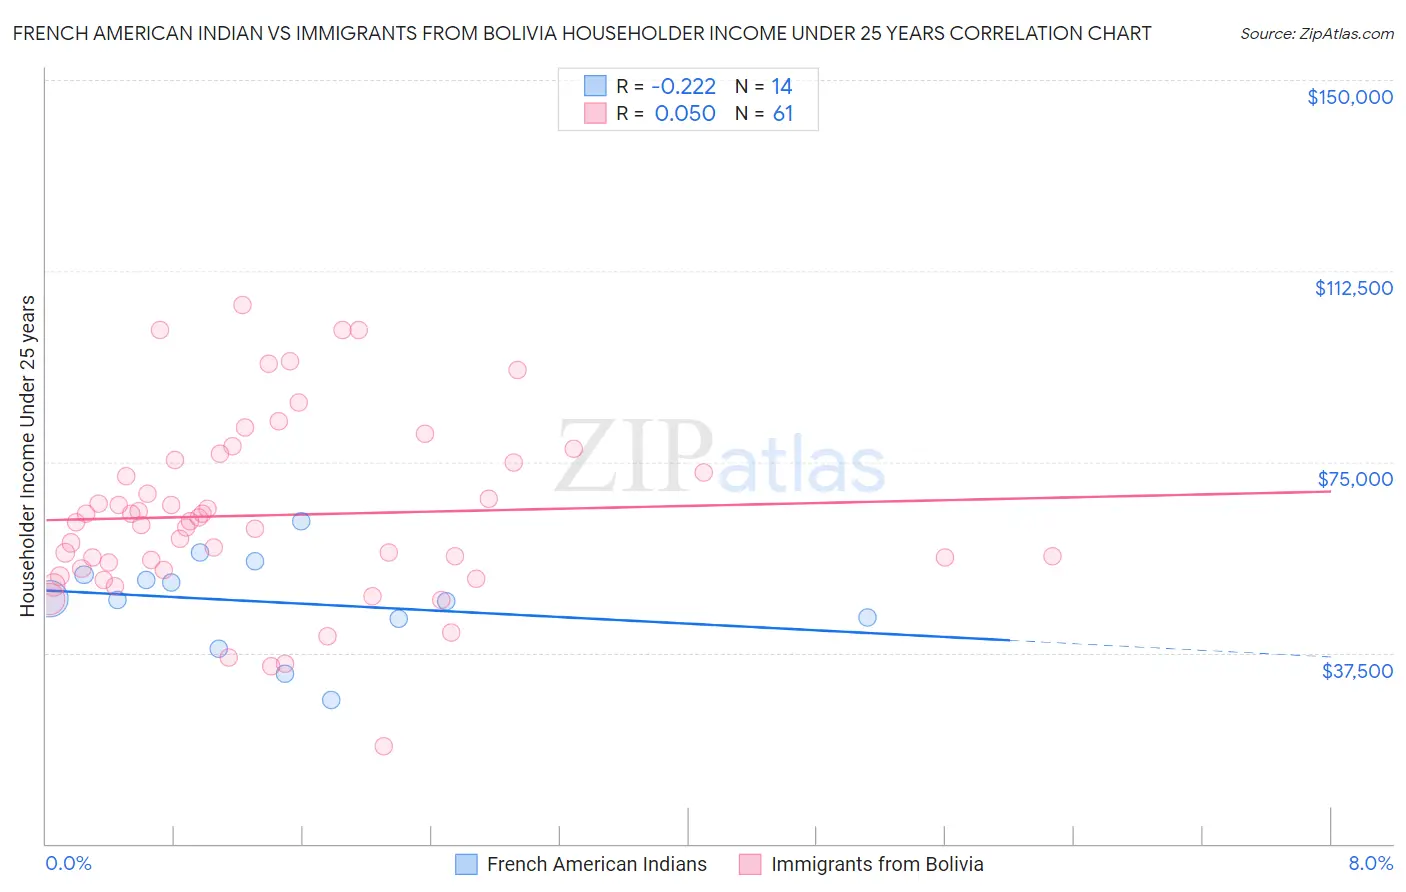 French American Indian vs Immigrants from Bolivia Householder Income Under 25 years